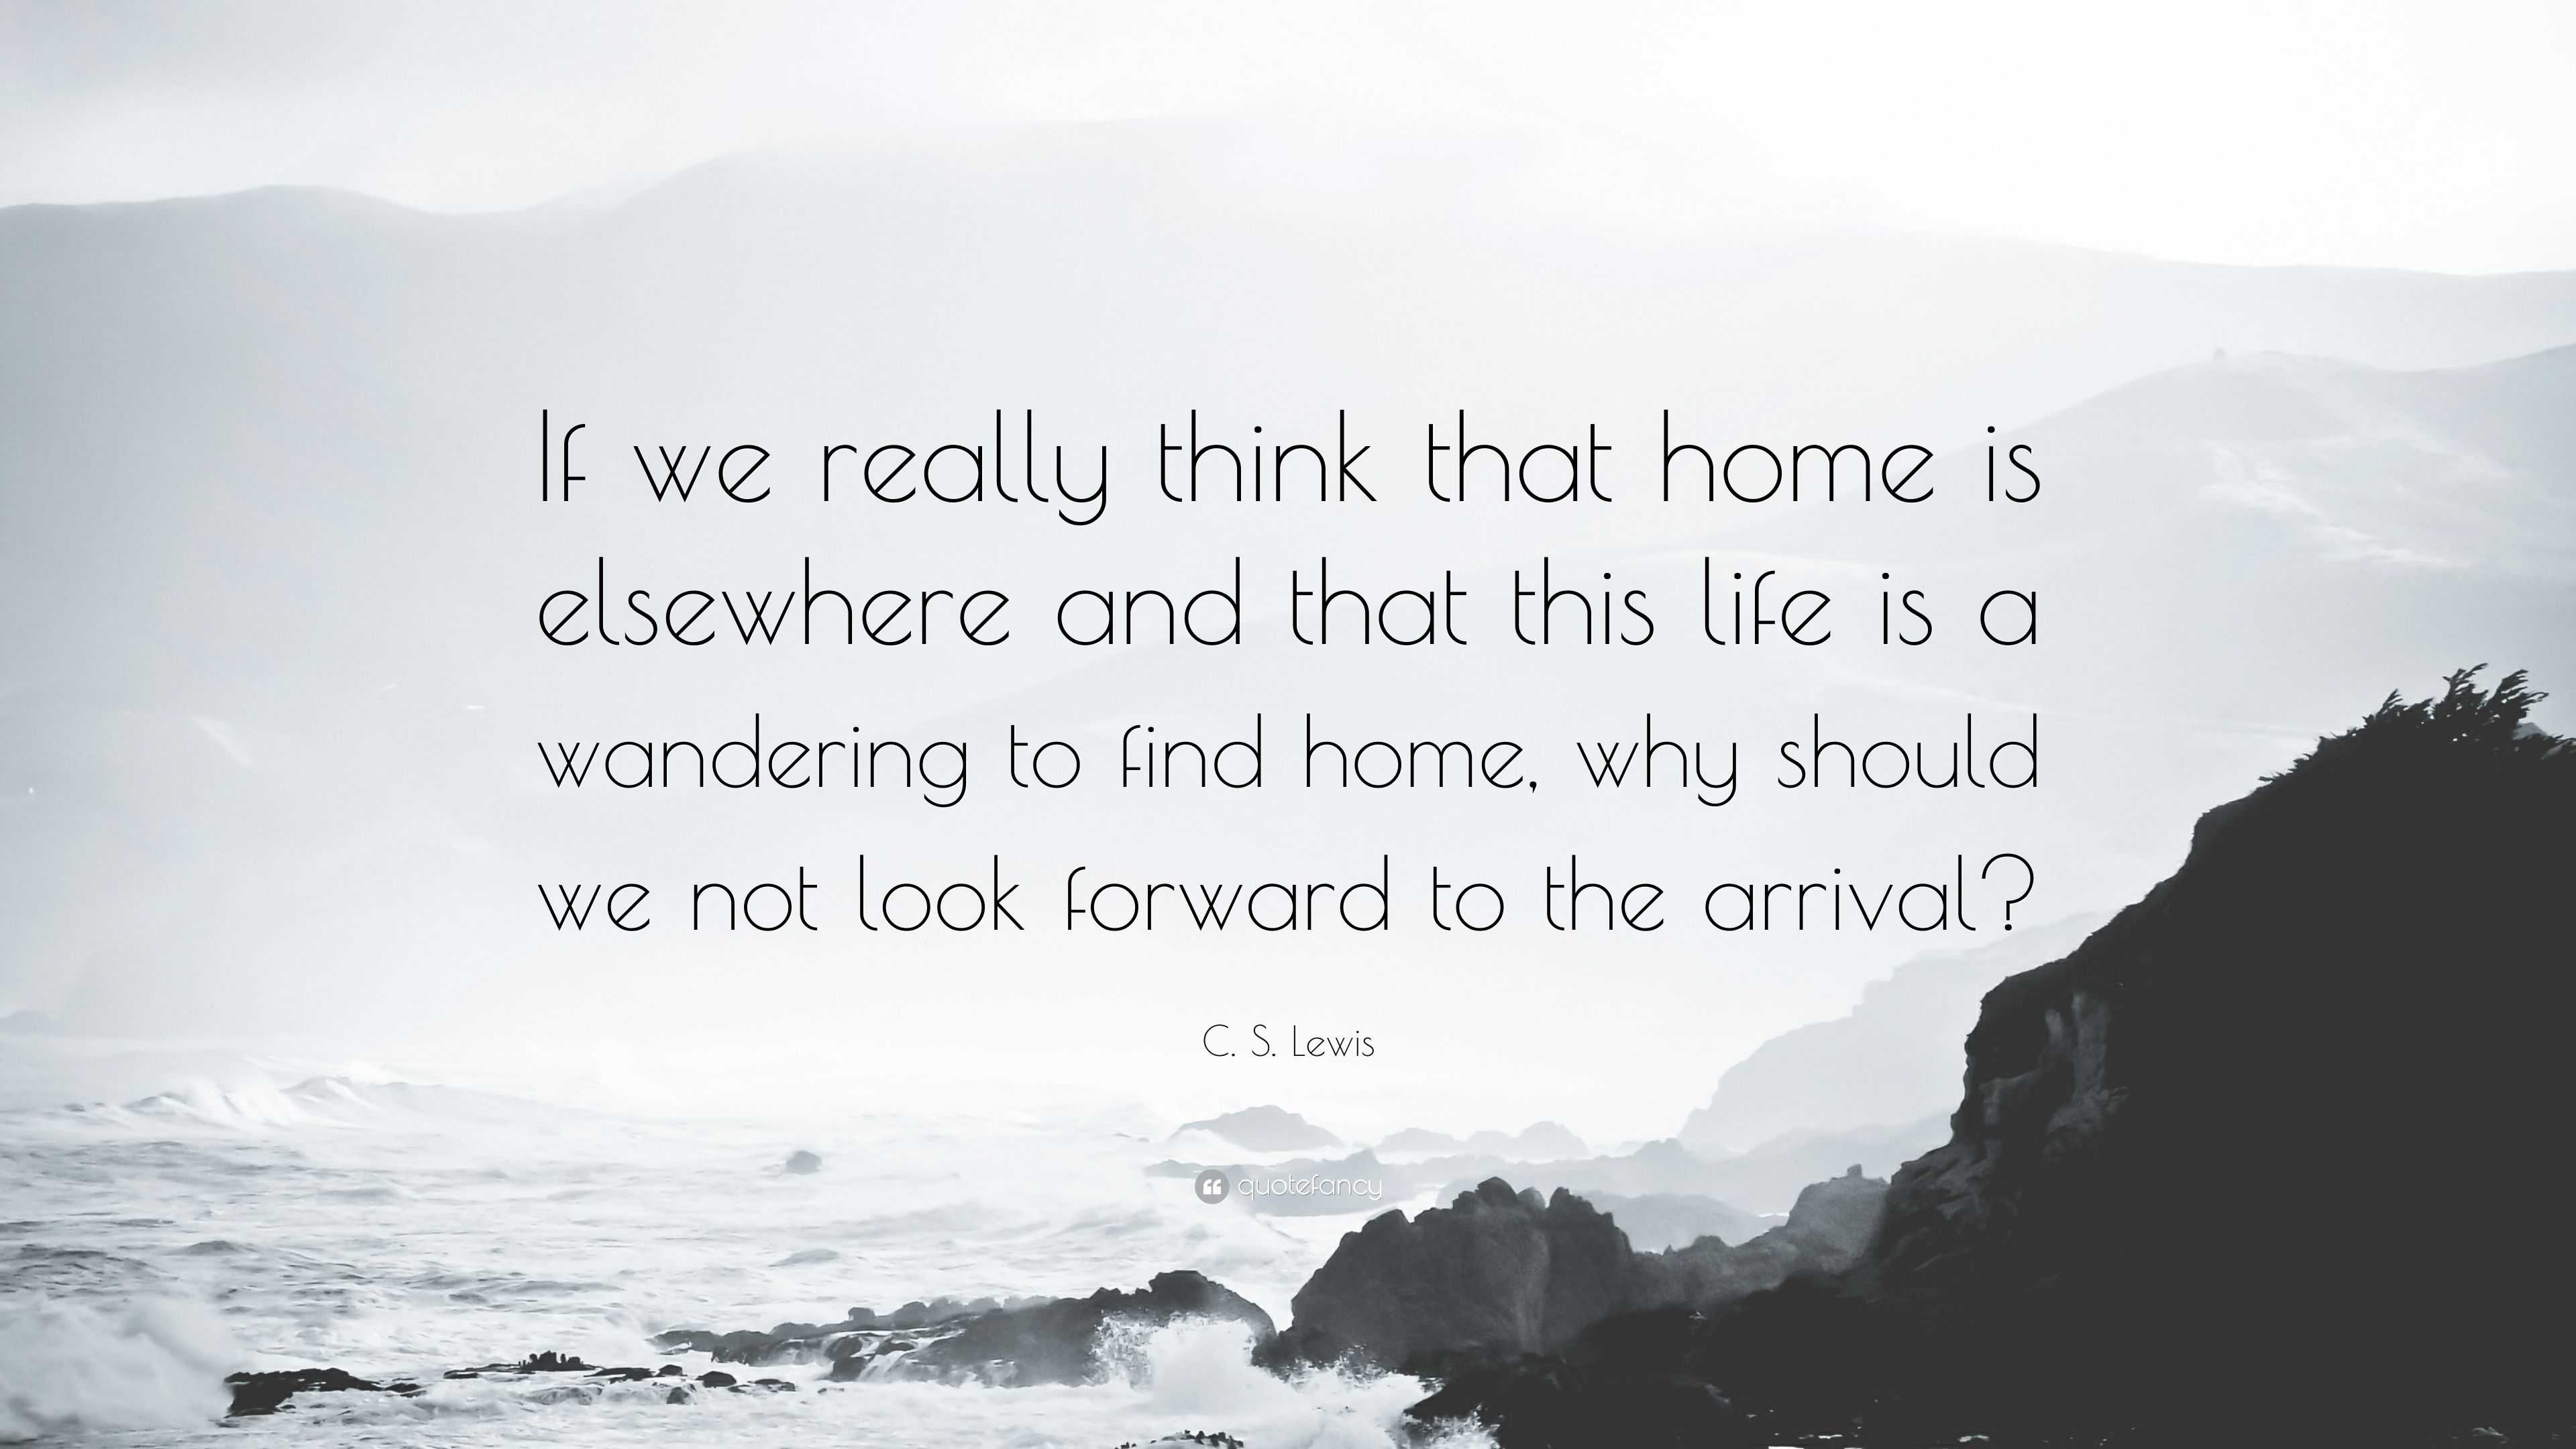 3695899-C-S-Lewis-Quote-If-we-really-think-that-home-is-elsewhere-and-that.jpg